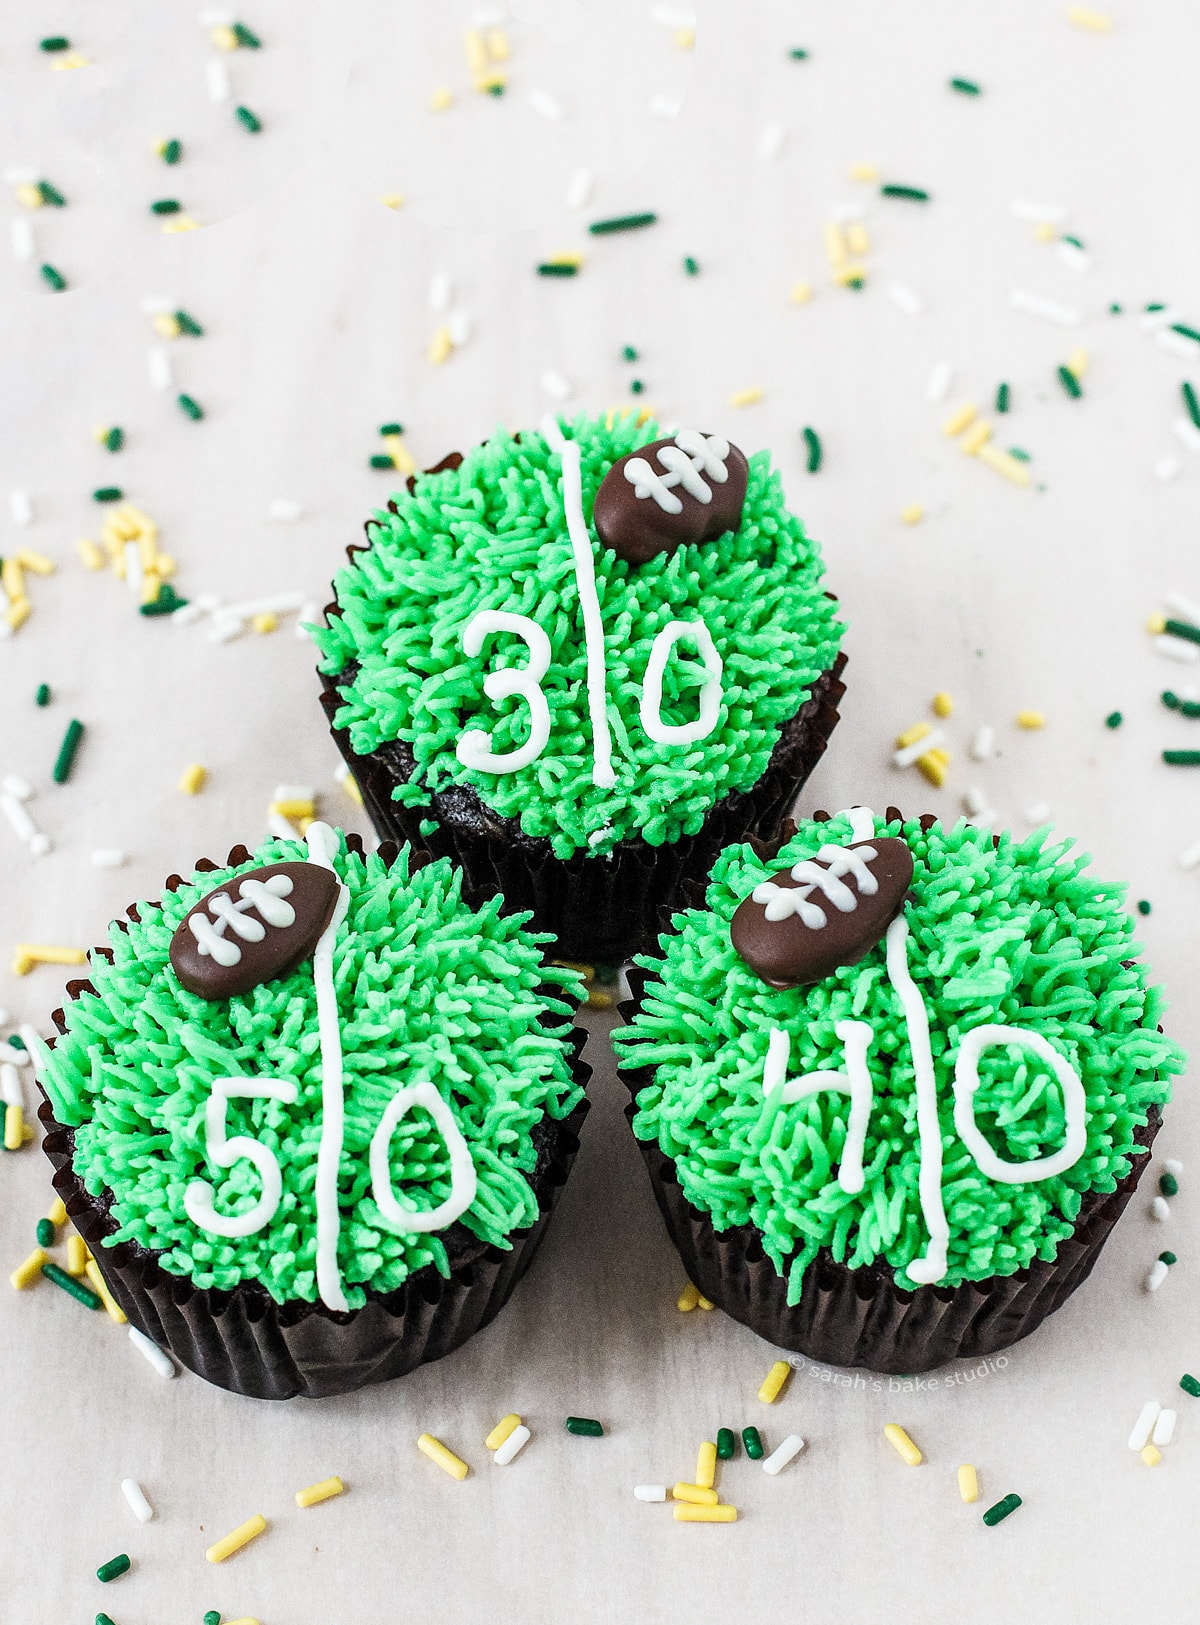 Game Day Football Cupcakes up close.